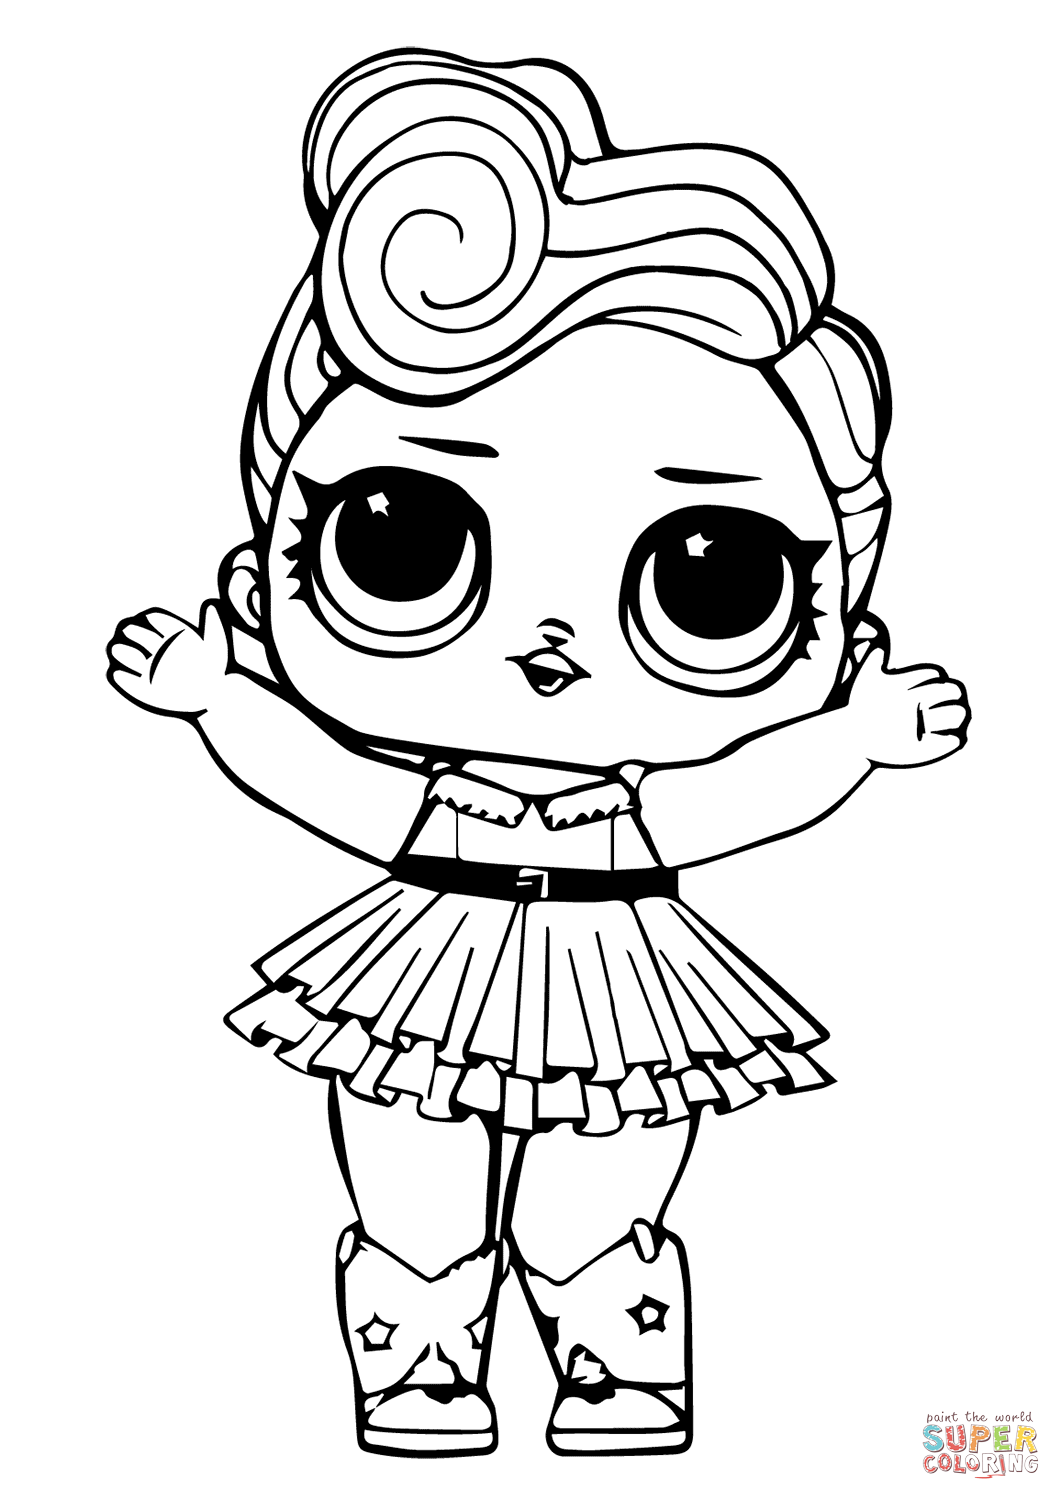 LOL Coloring Pages FREE Printable 147